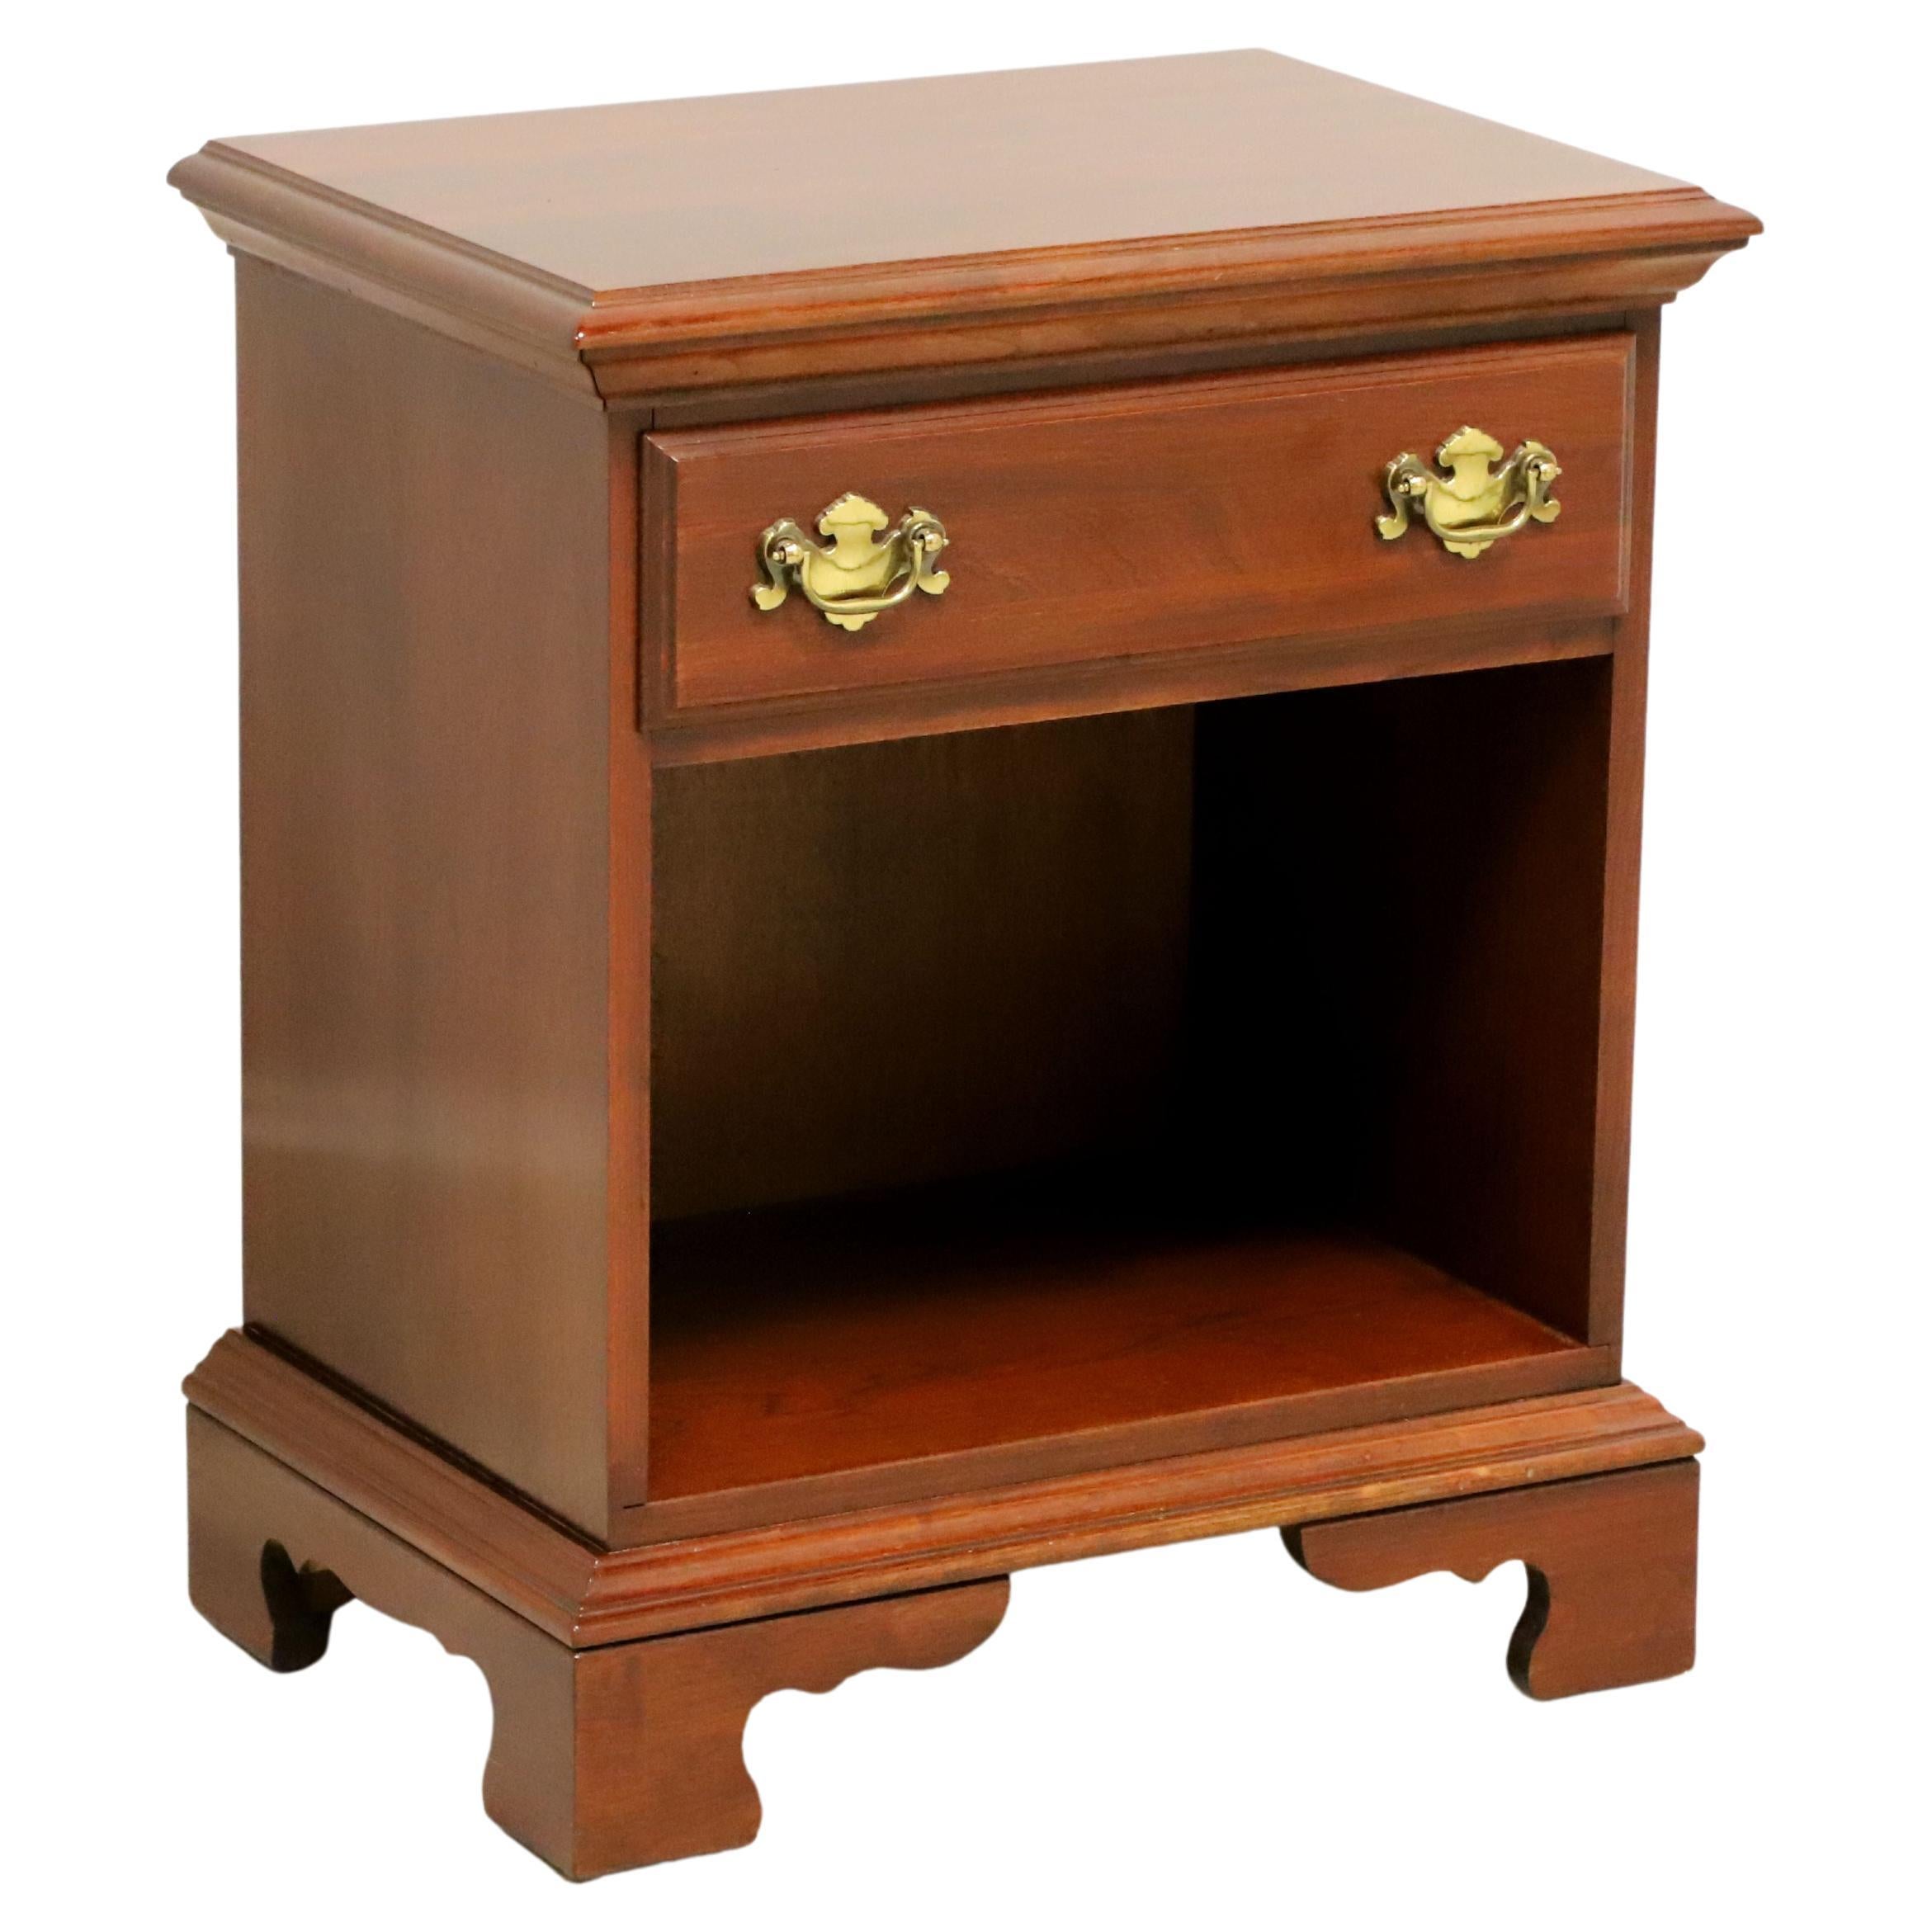 JAMESTOWN STERLING Cherry Chippendale One-Drawer Nightstand Bedside Chest For Sale